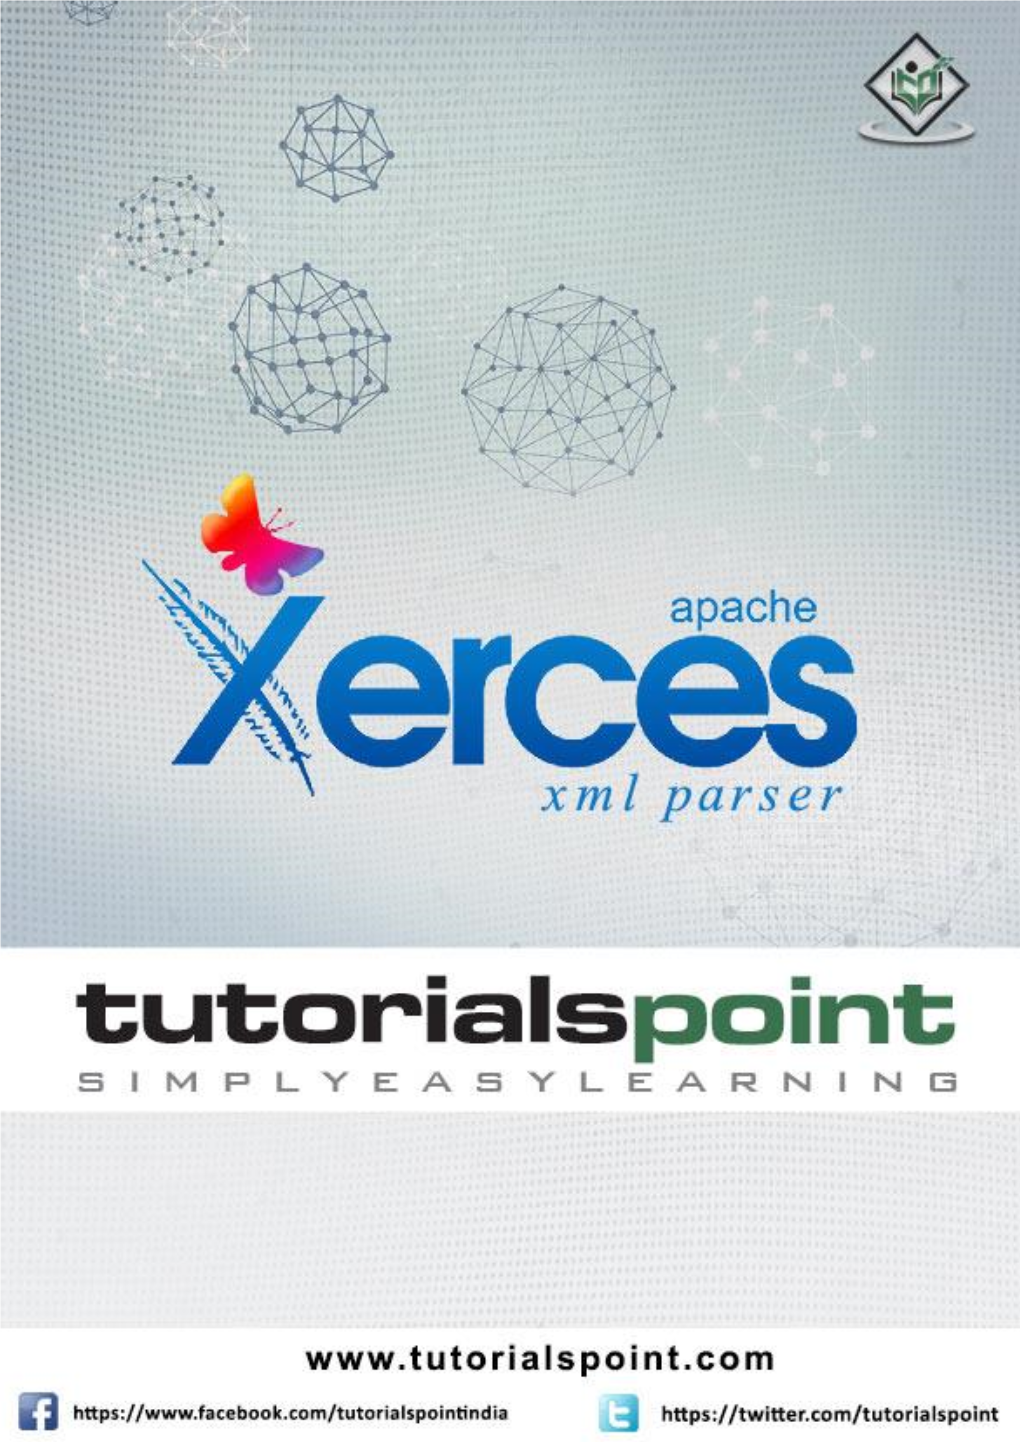 Apache Xerces Is a Java-Based Processor That Provides Standard Interfaces and Implementations for DOM, SAX and Stax XML Parsing API Standards